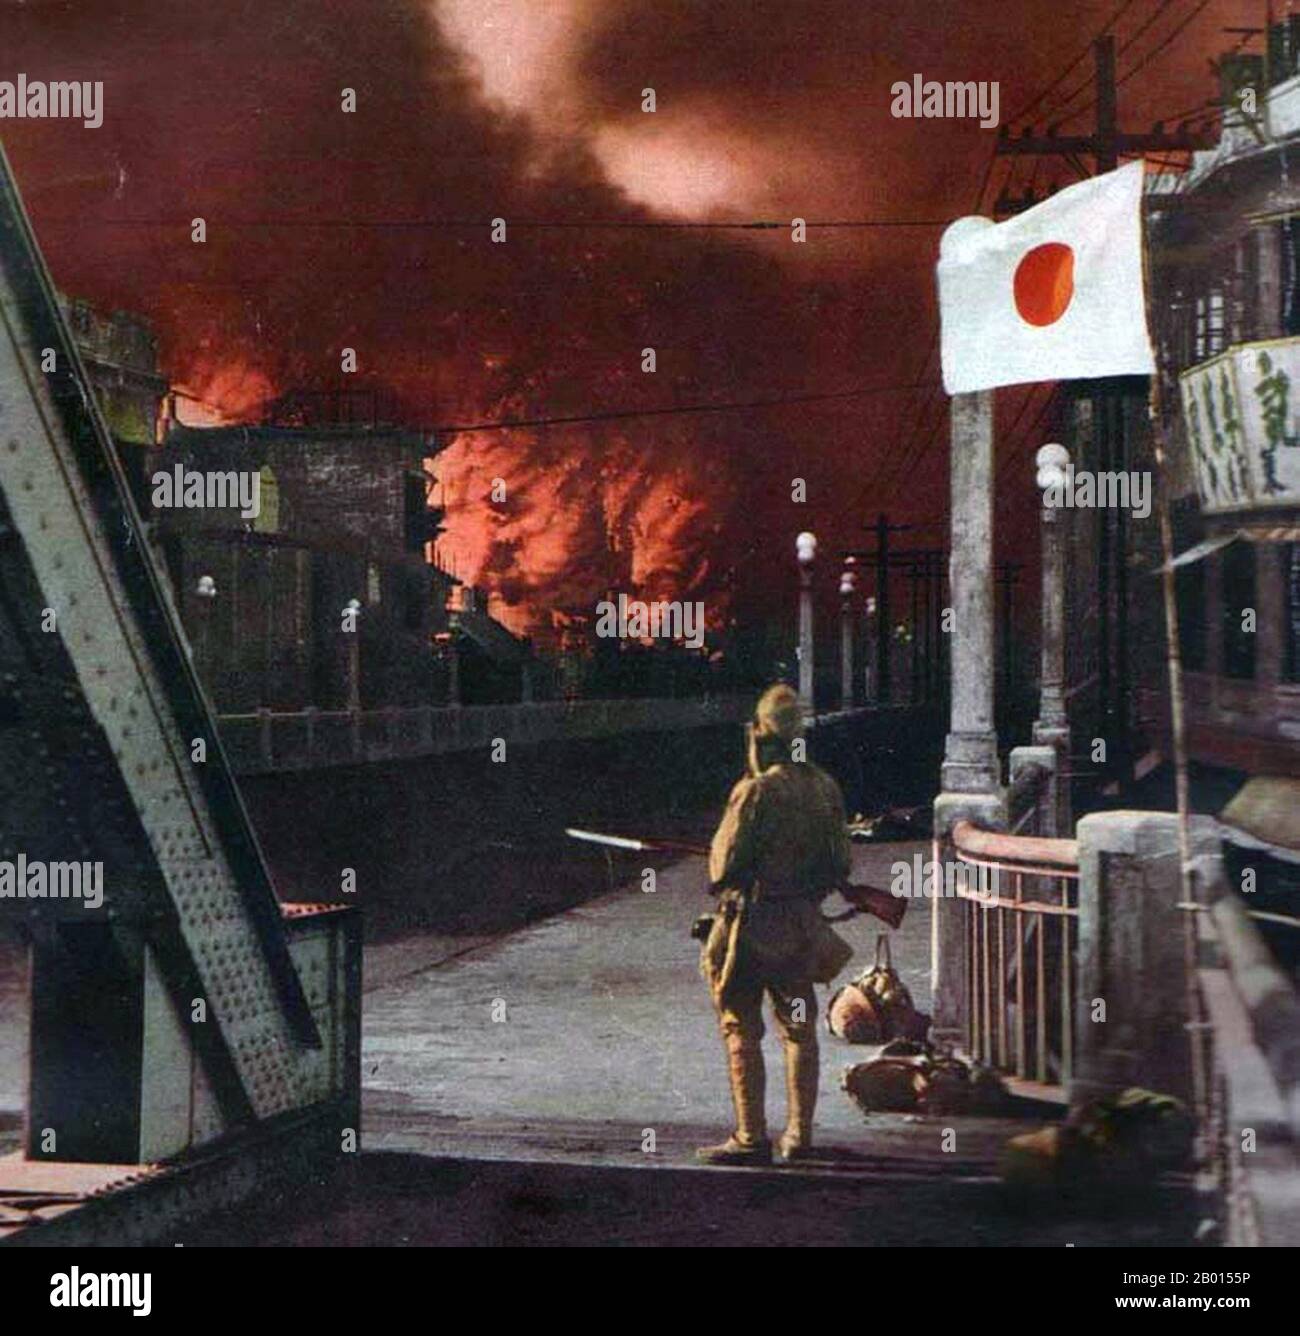 China: Shanghai suburbs ablaze as a Japanese soldier looks on. Second Sino-Japanese War (July 7, 1937 – September 9, 1945).  The Second Sino-Japanese War was a military conflict fought primarily between the Republic of China and the Empire of Japan. After the Japanese attack on Pearl Harbor, the war merged into the greater conflict of World War II as a major front of what is broadly known as the Pacific War. Although the two countries had fought intermittently since 1931, total war started in earnest in 1937 and ended only with the surrender of Japan in 1945. Stock Photo